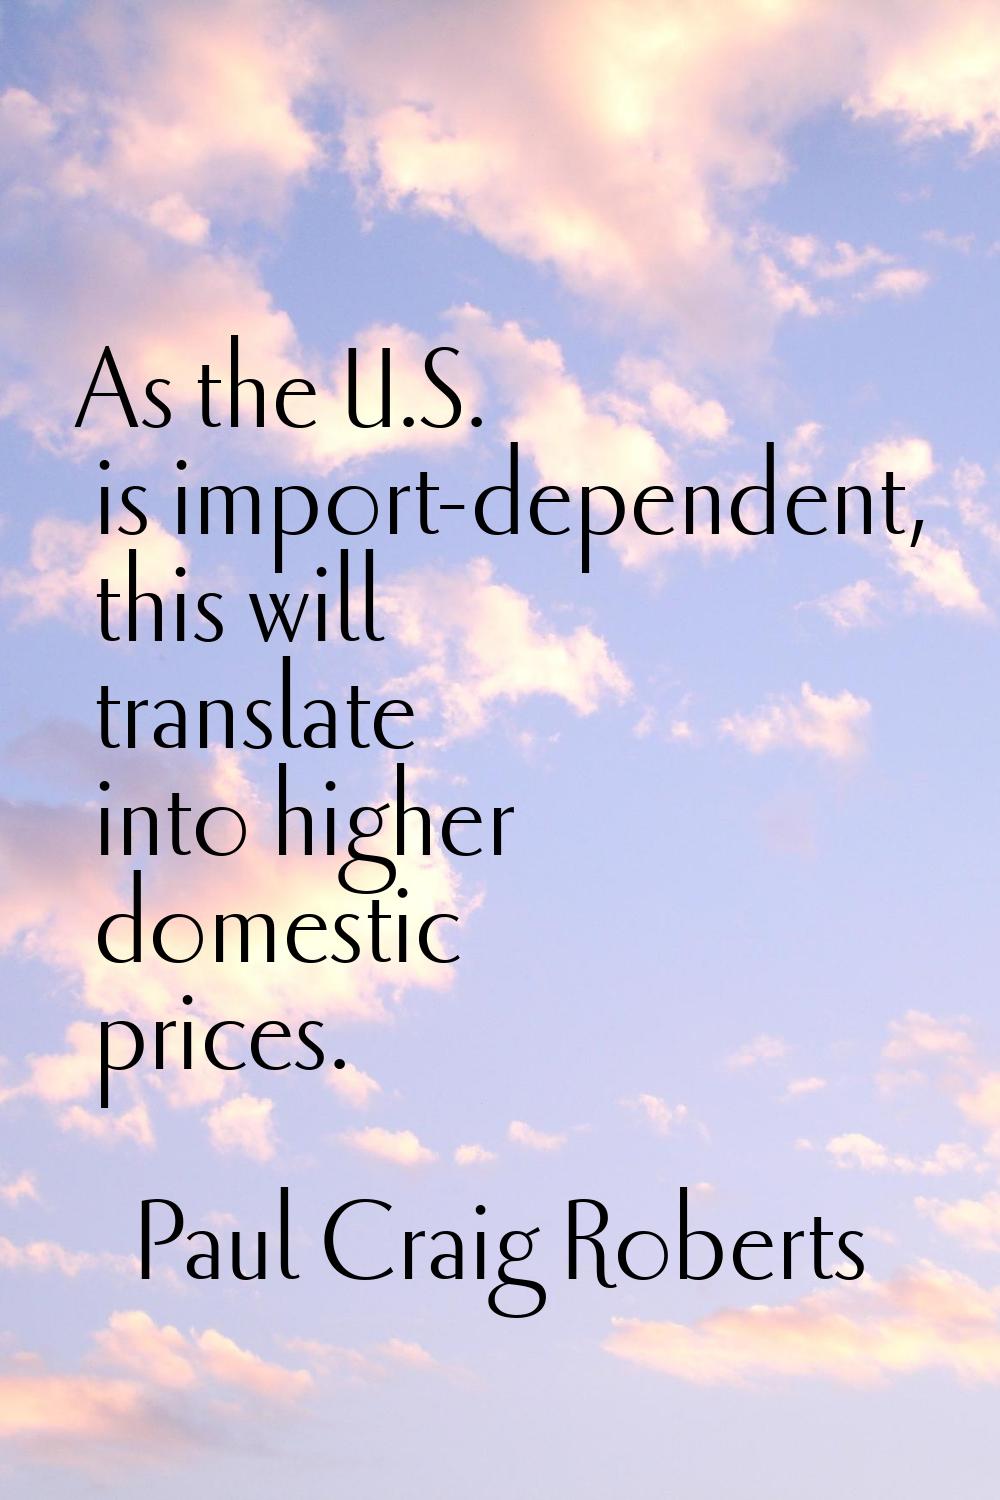 As the U.S. is import-dependent, this will translate into higher domestic prices.